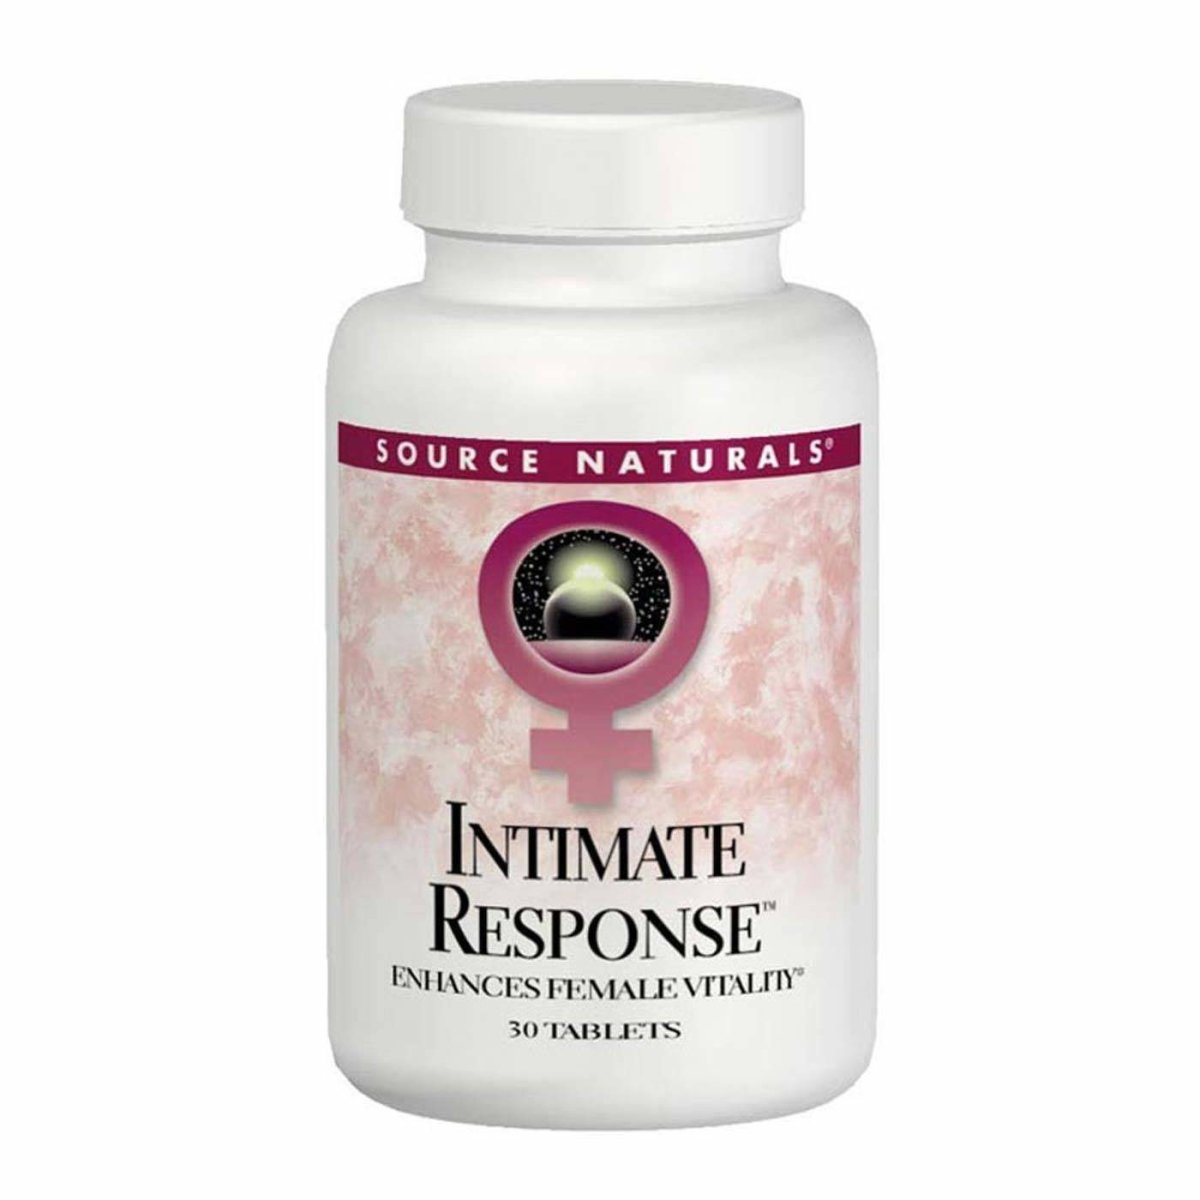 ETERNAL WOMAN INTIMATE RESPONSE 30 TABLET - SOURCE NATURALS